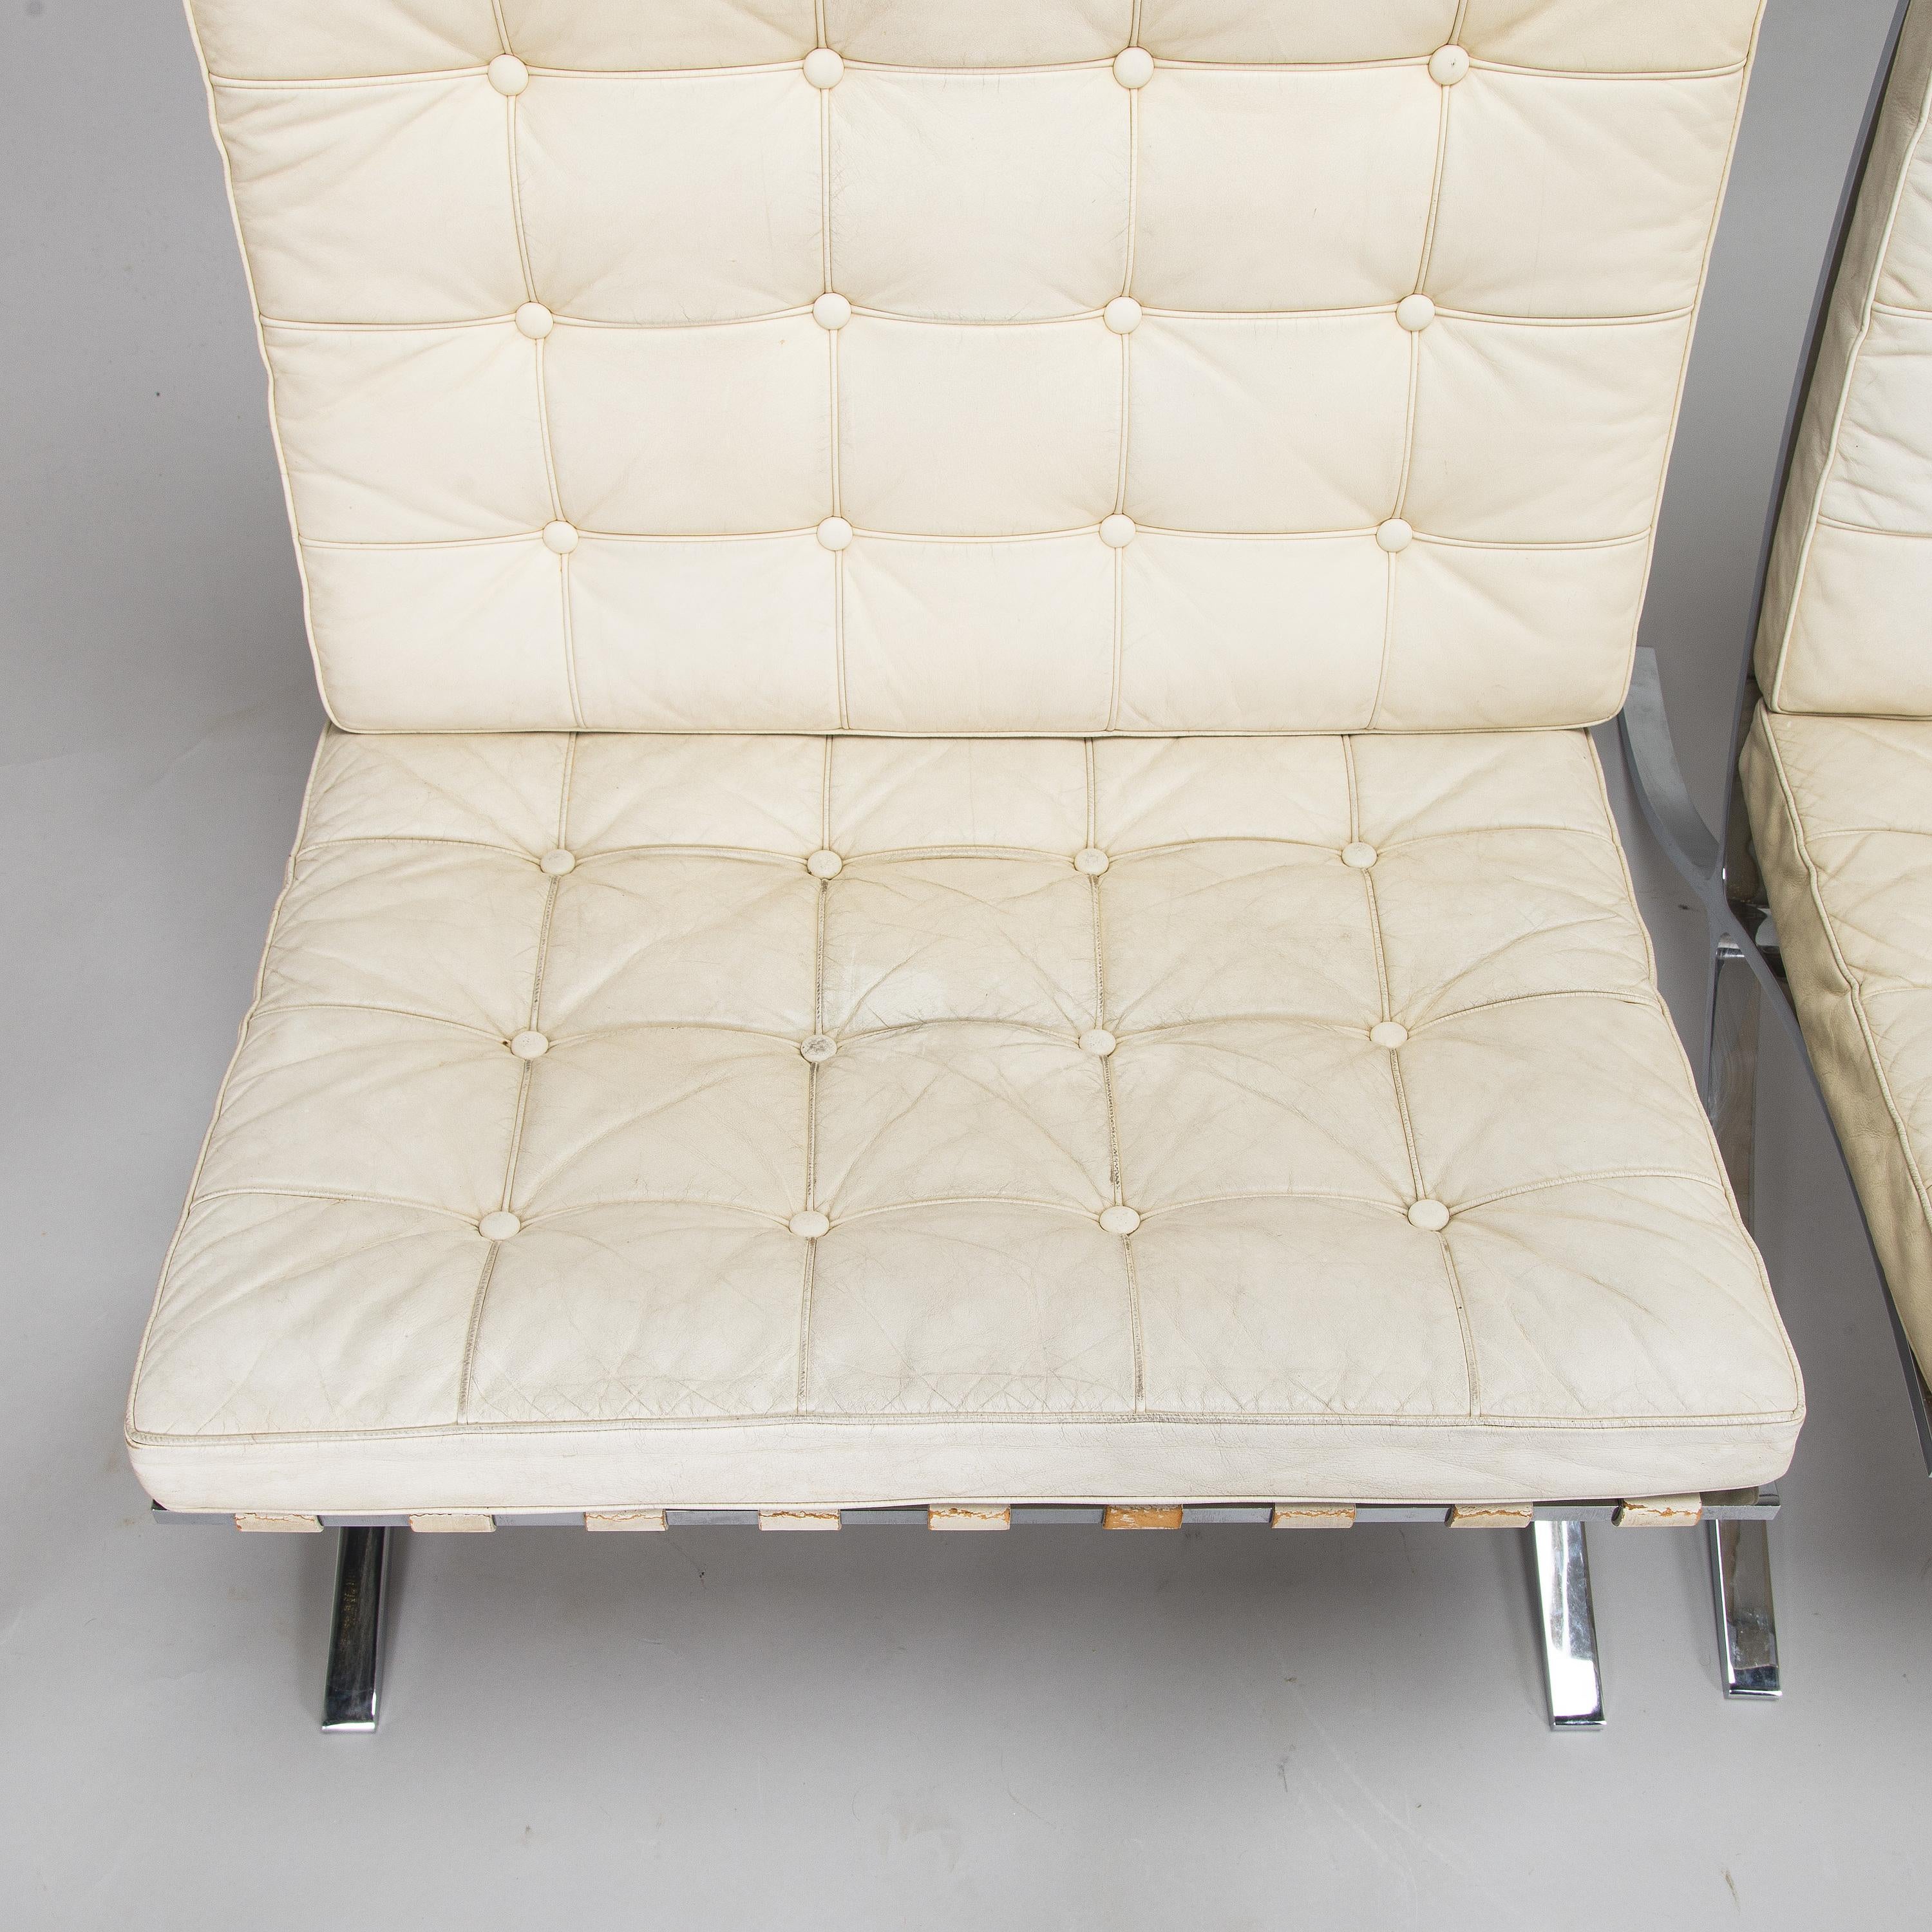 20th Century Ludwig Mies van der Rohe 'Barcelona' chair for Knoll made in USA 1965 For Sale